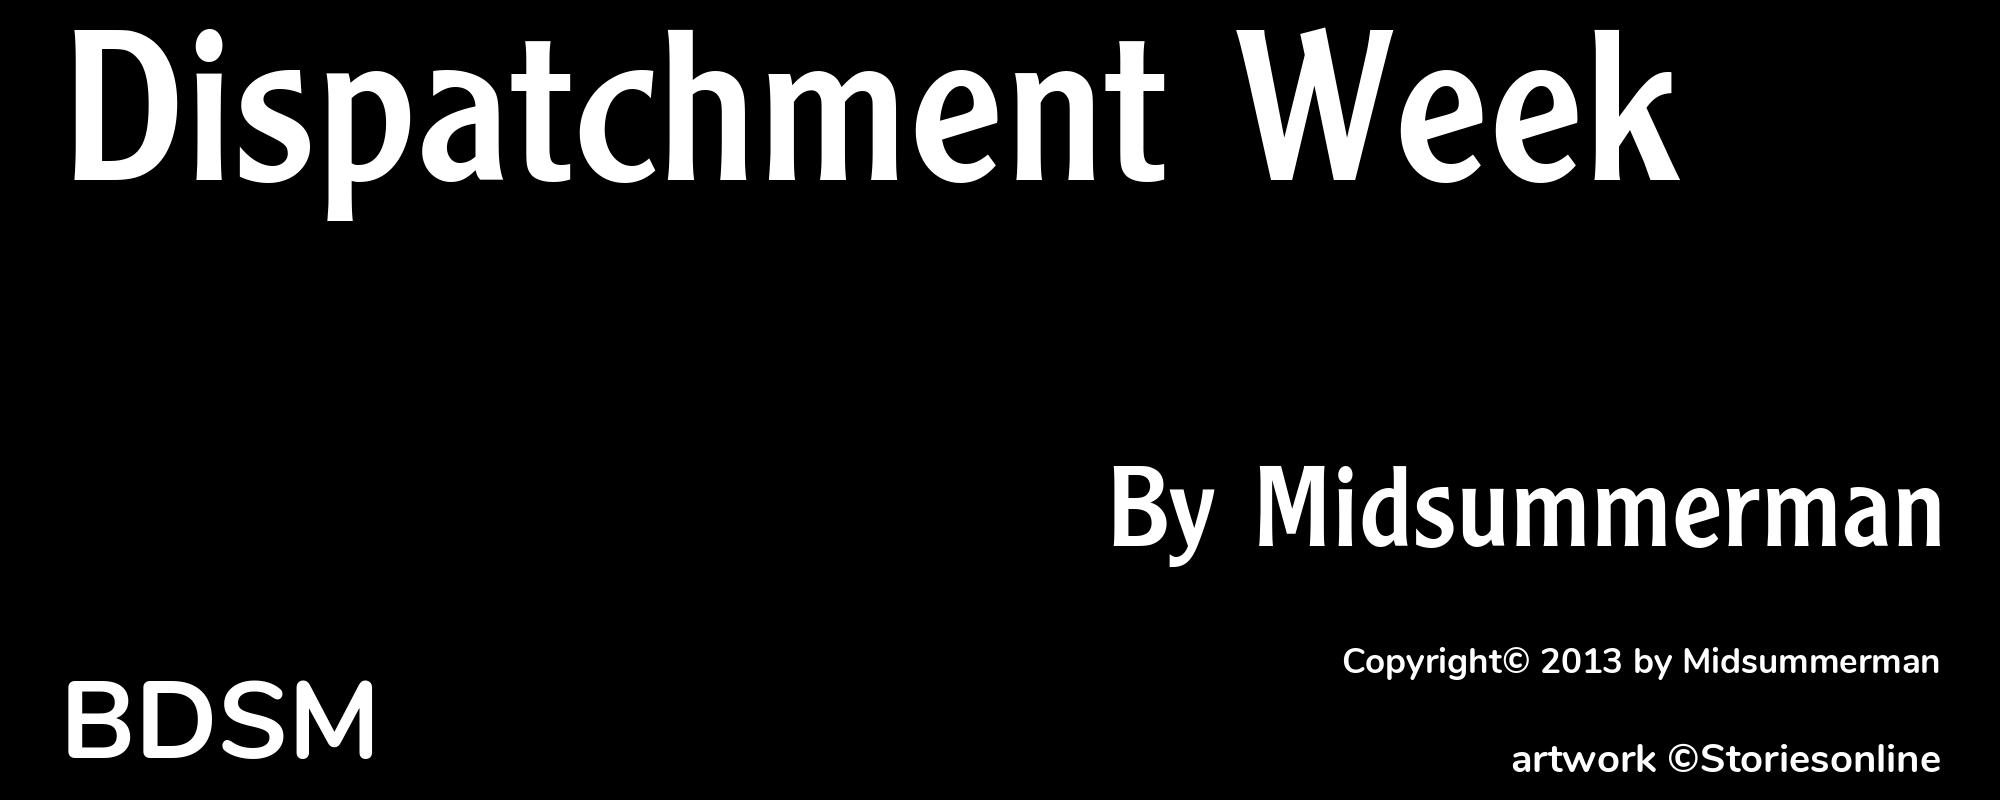 Dispatchment Week - Cover